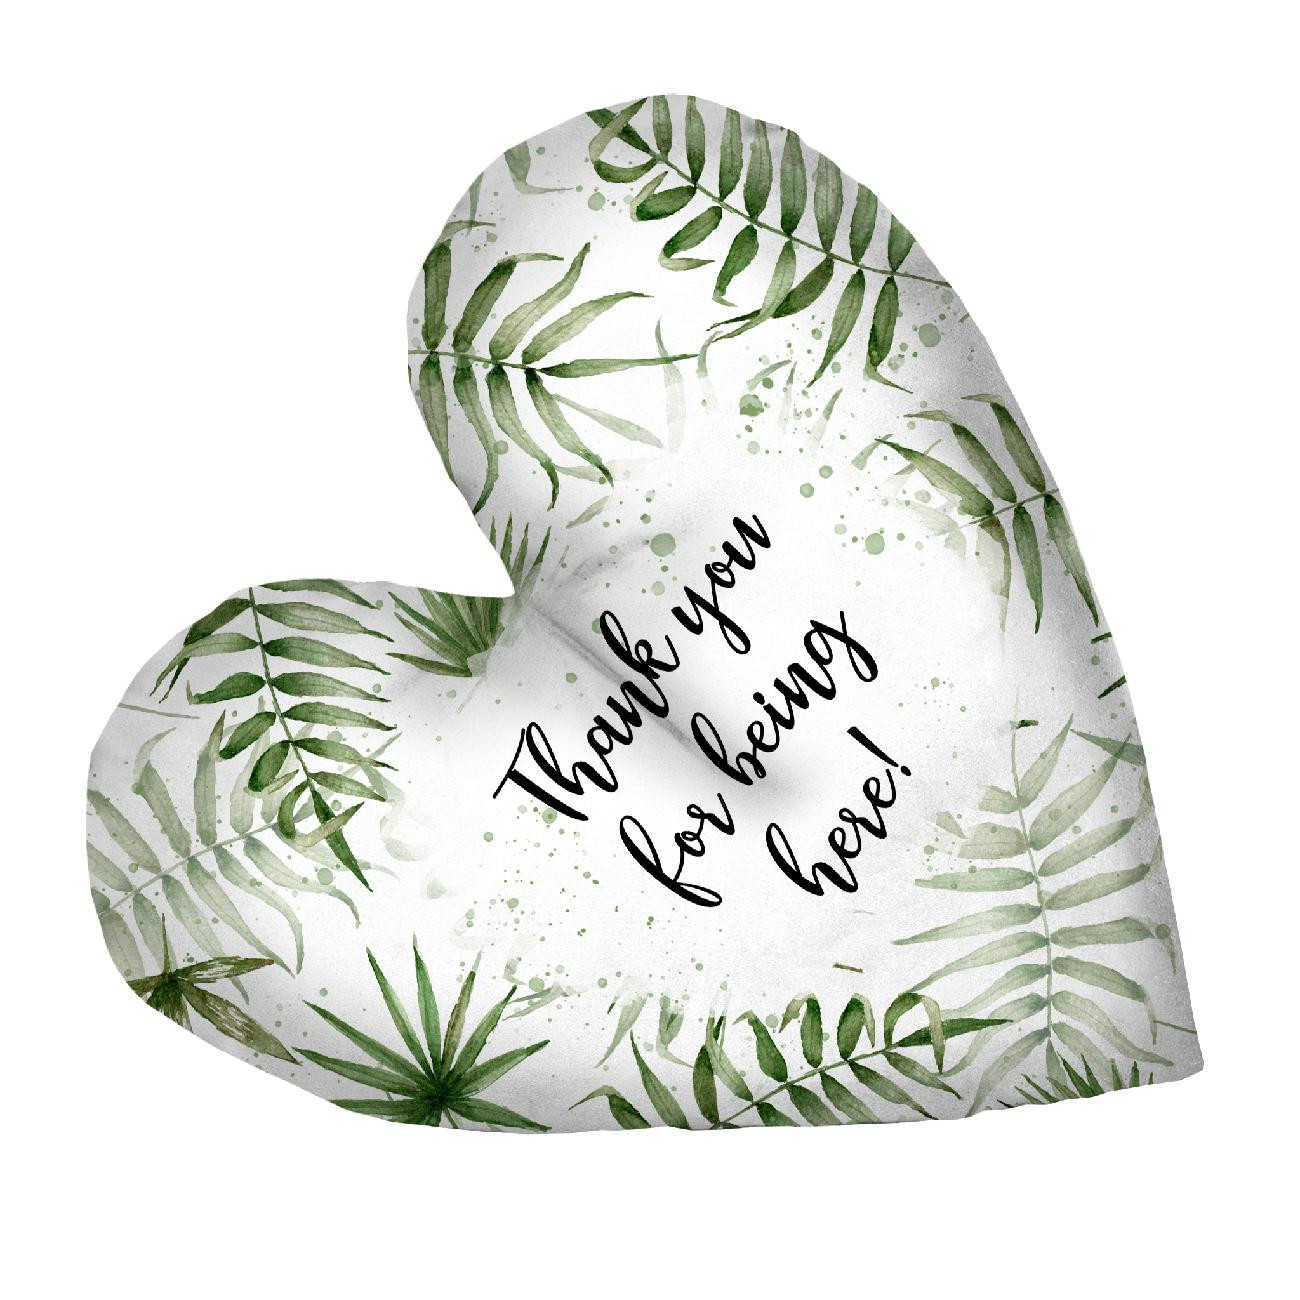 DECORATIVE PILLOW HEART - Thank you for being here!